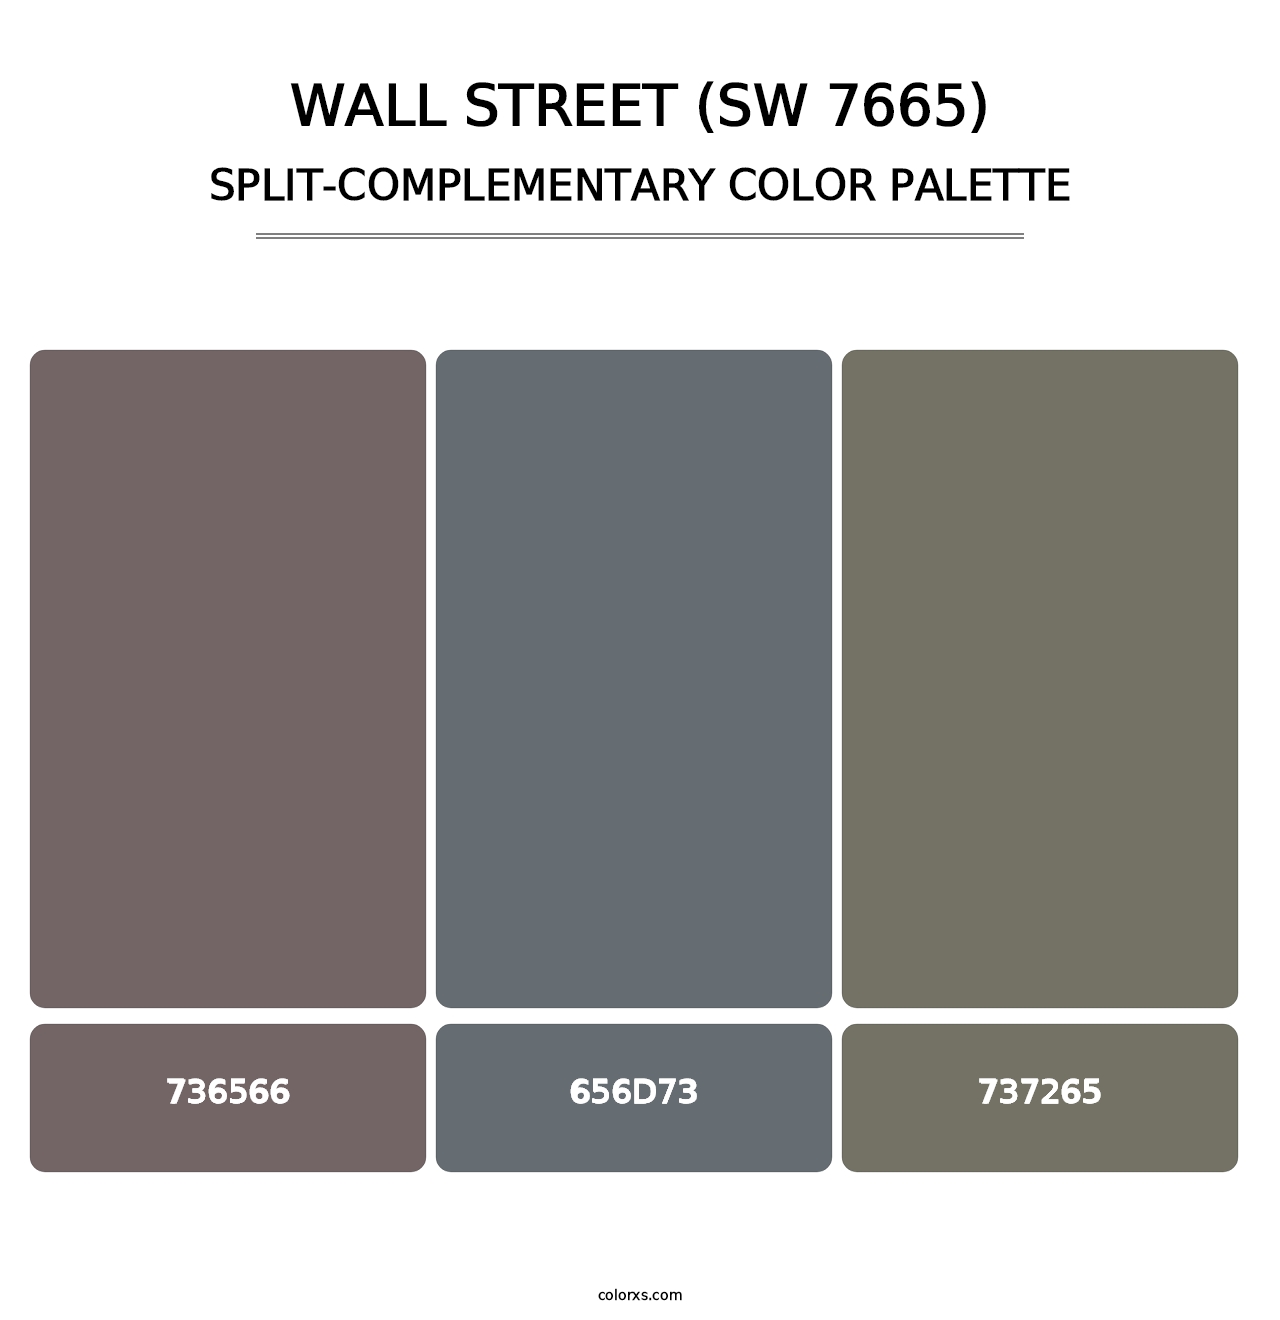 Wall Street (SW 7665) - Split-Complementary Color Palette